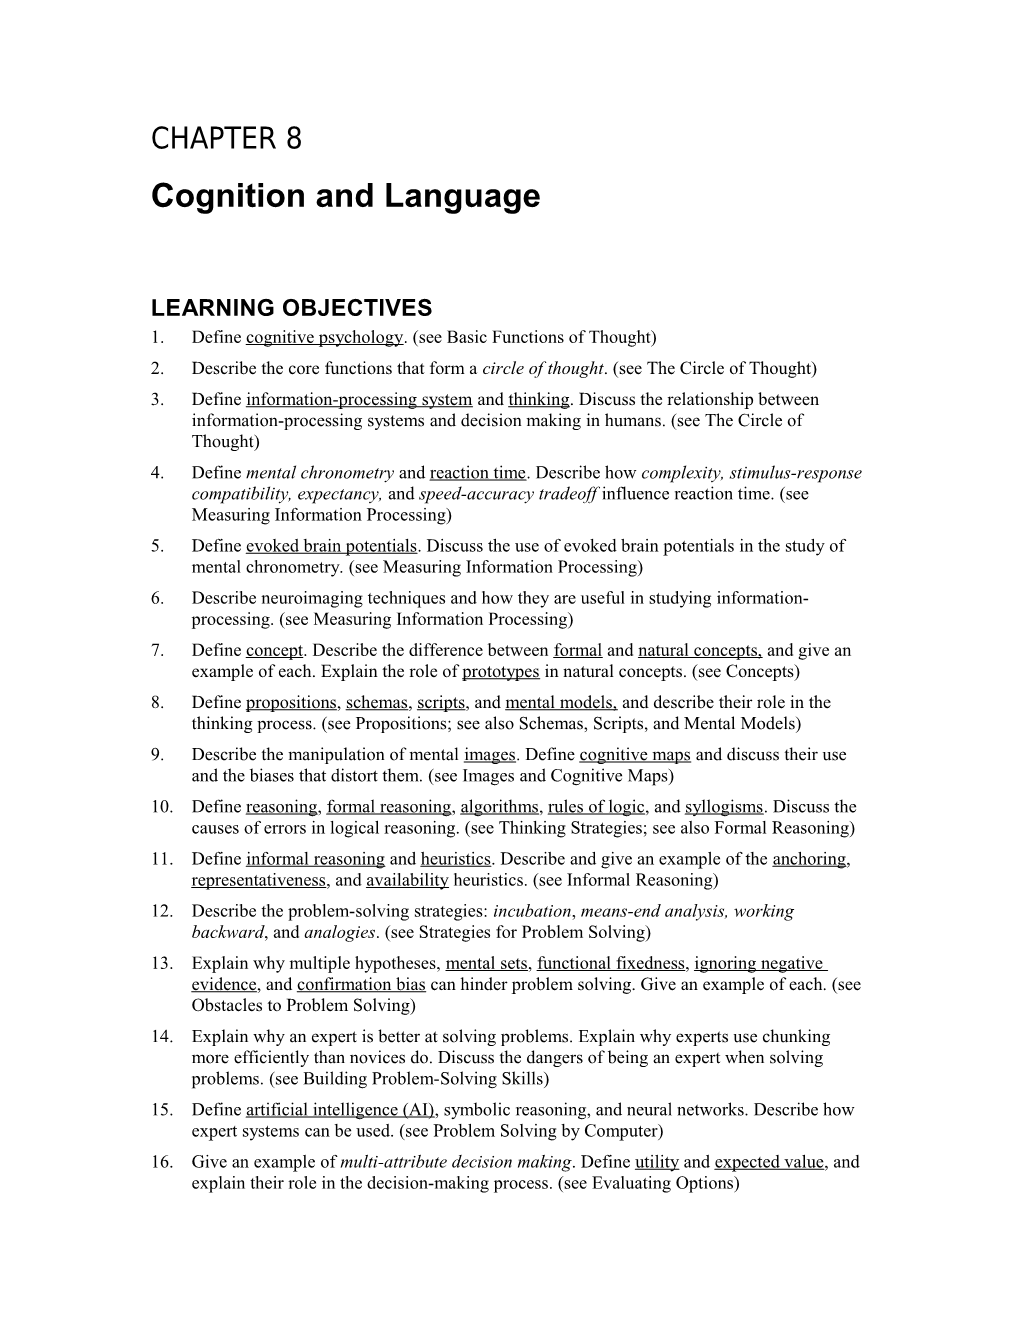 Cognition and Language